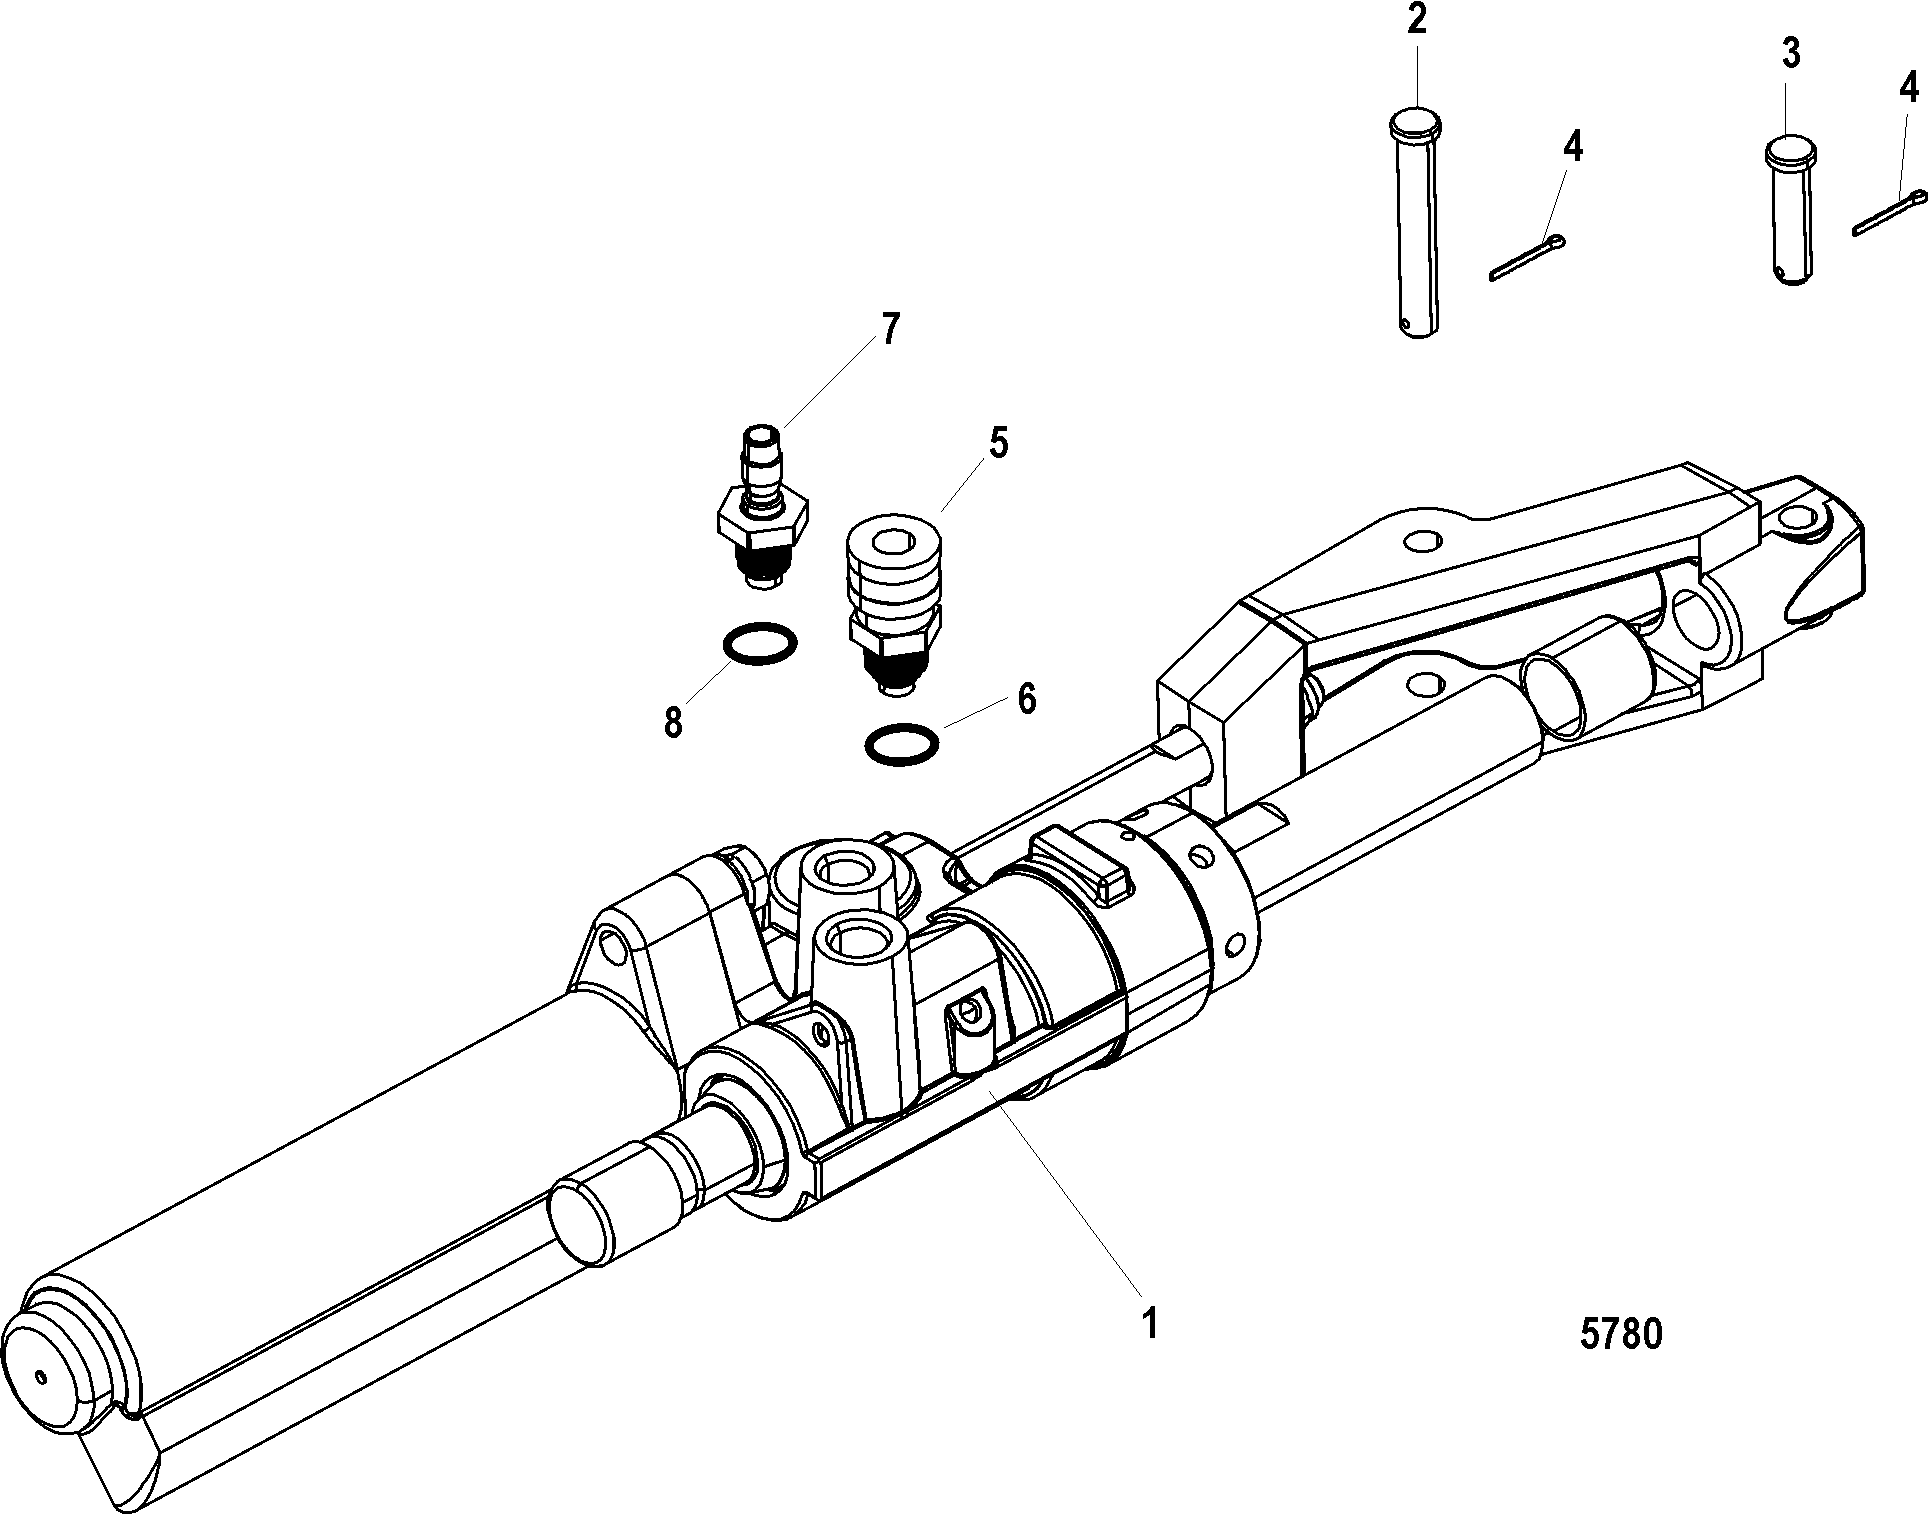 Power Steering Actuator(Magnum And Hi-Performance Transom)